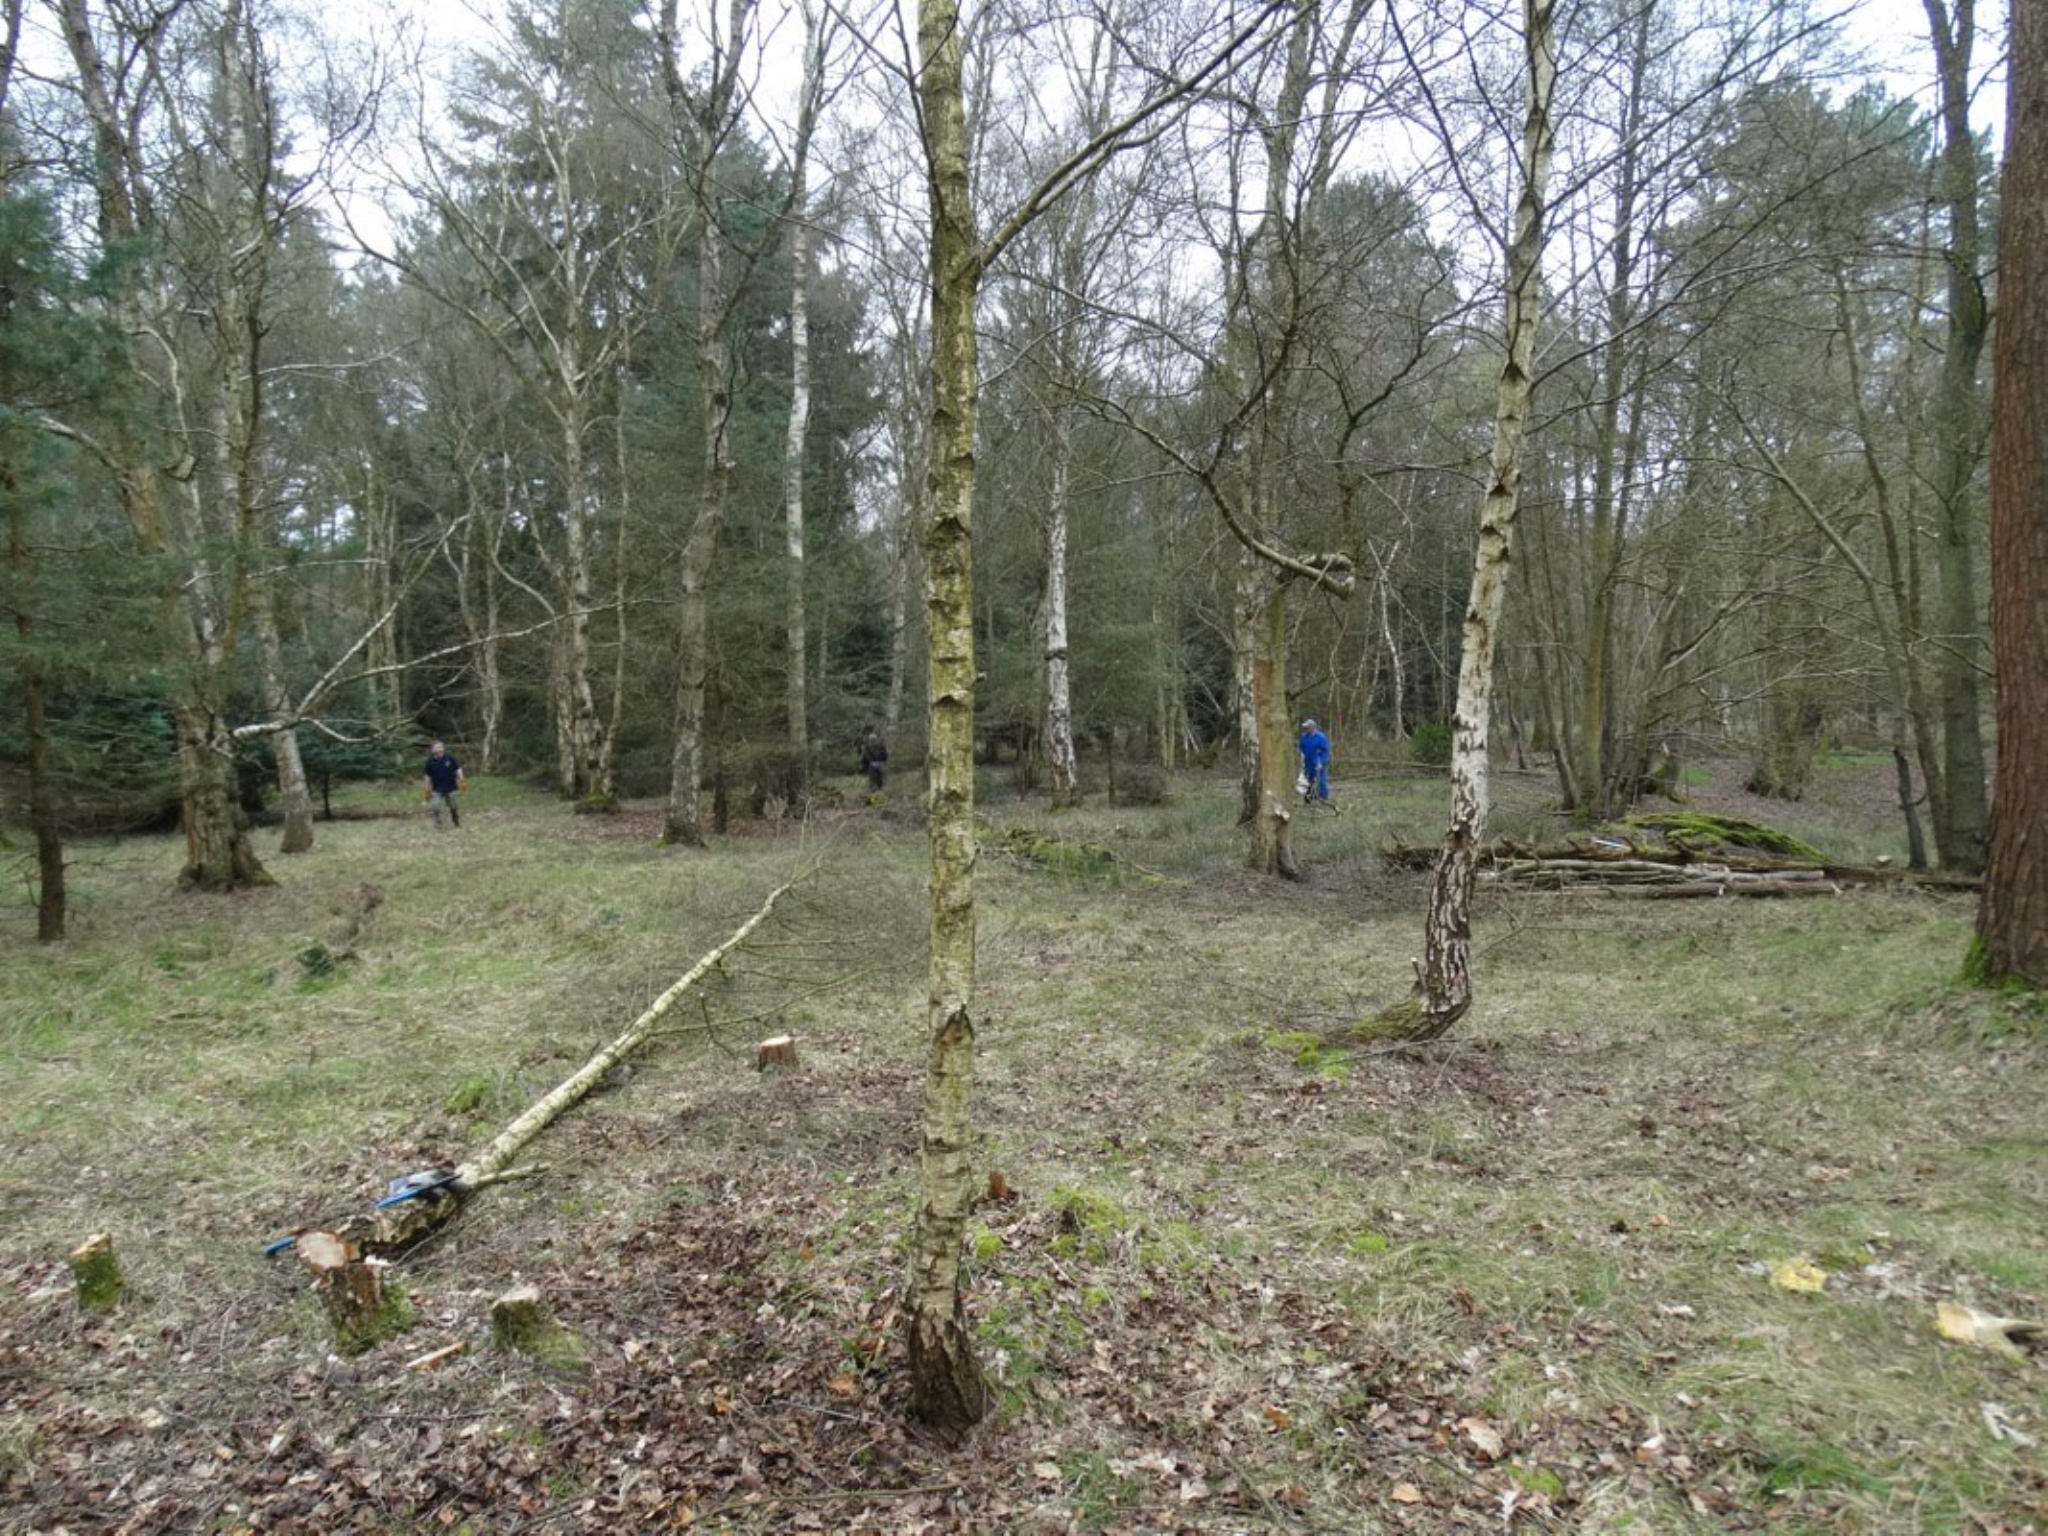 A photo from the FoTF Conservation Event - April 2018 - Improving habitat at High Lodge : A felled tree lies on the ground